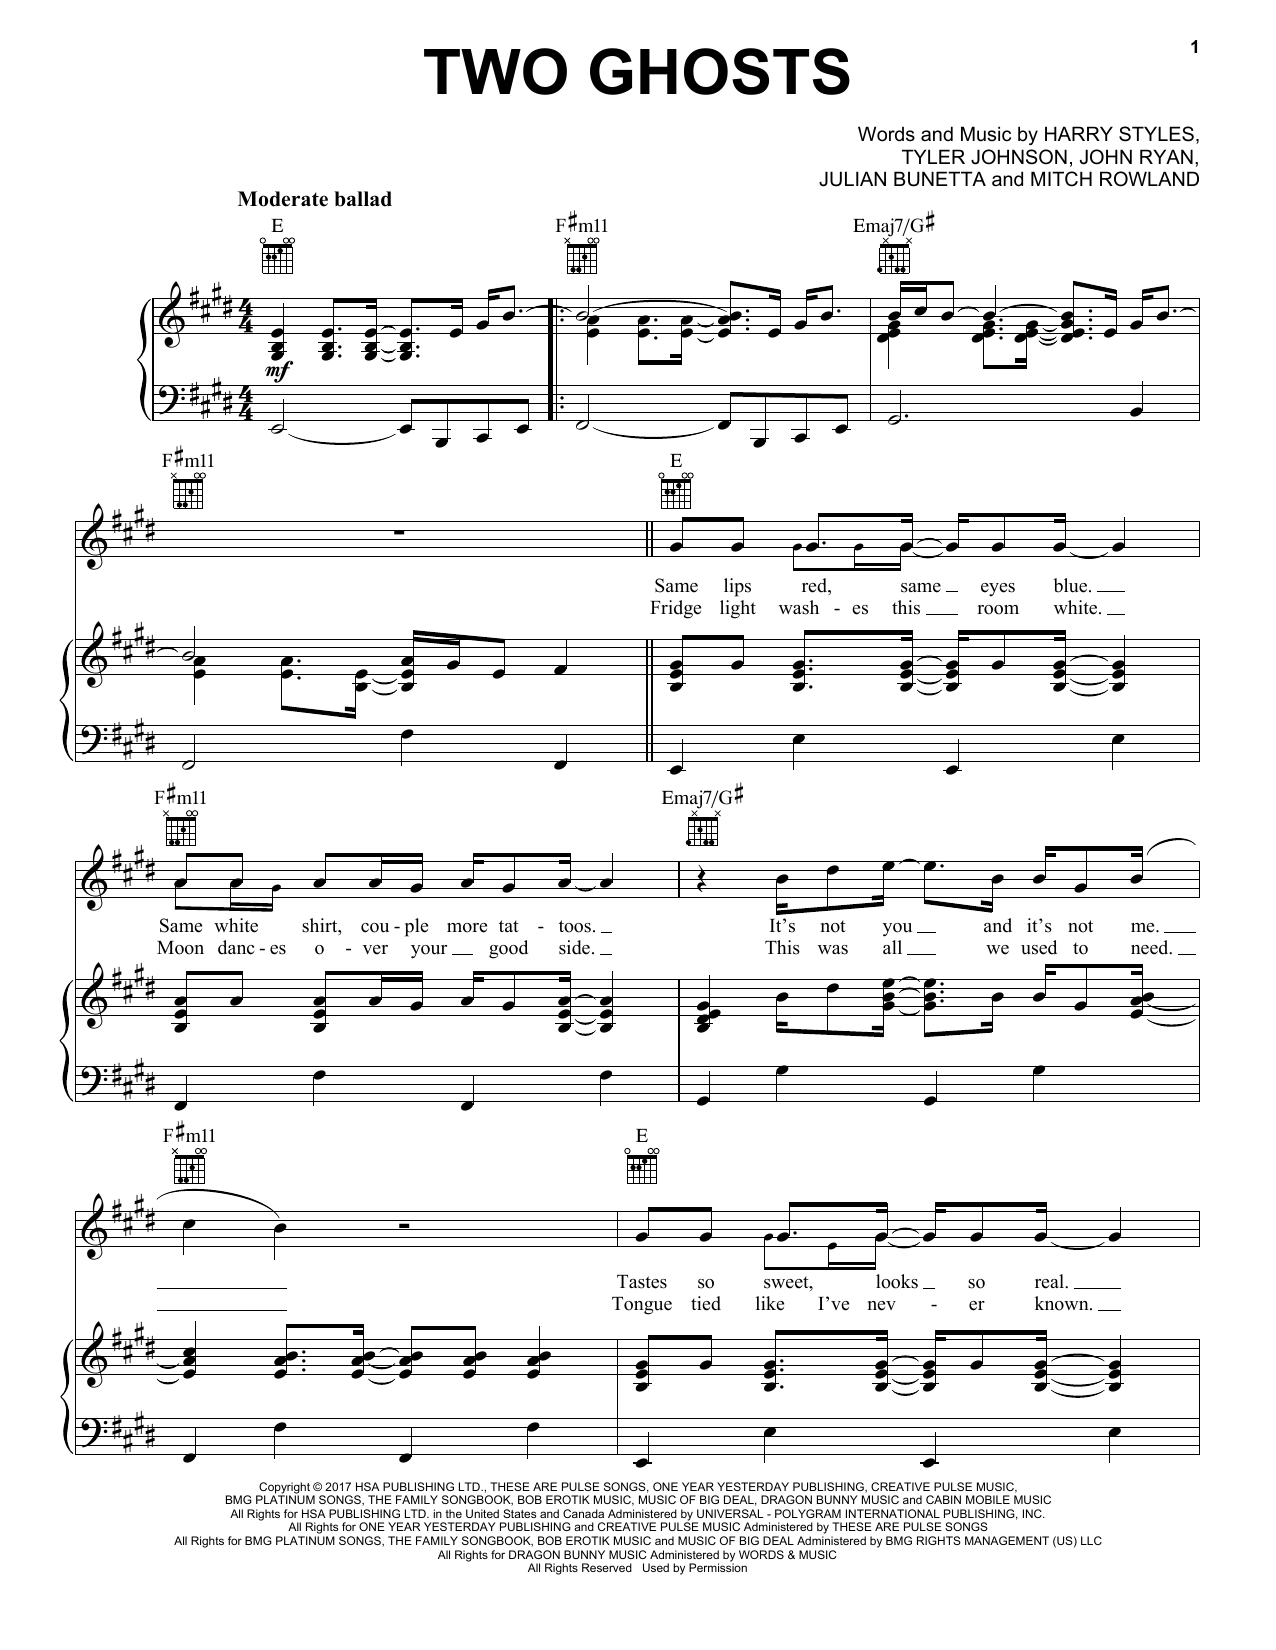 Download Harry Styles Two Ghosts Sheet Music